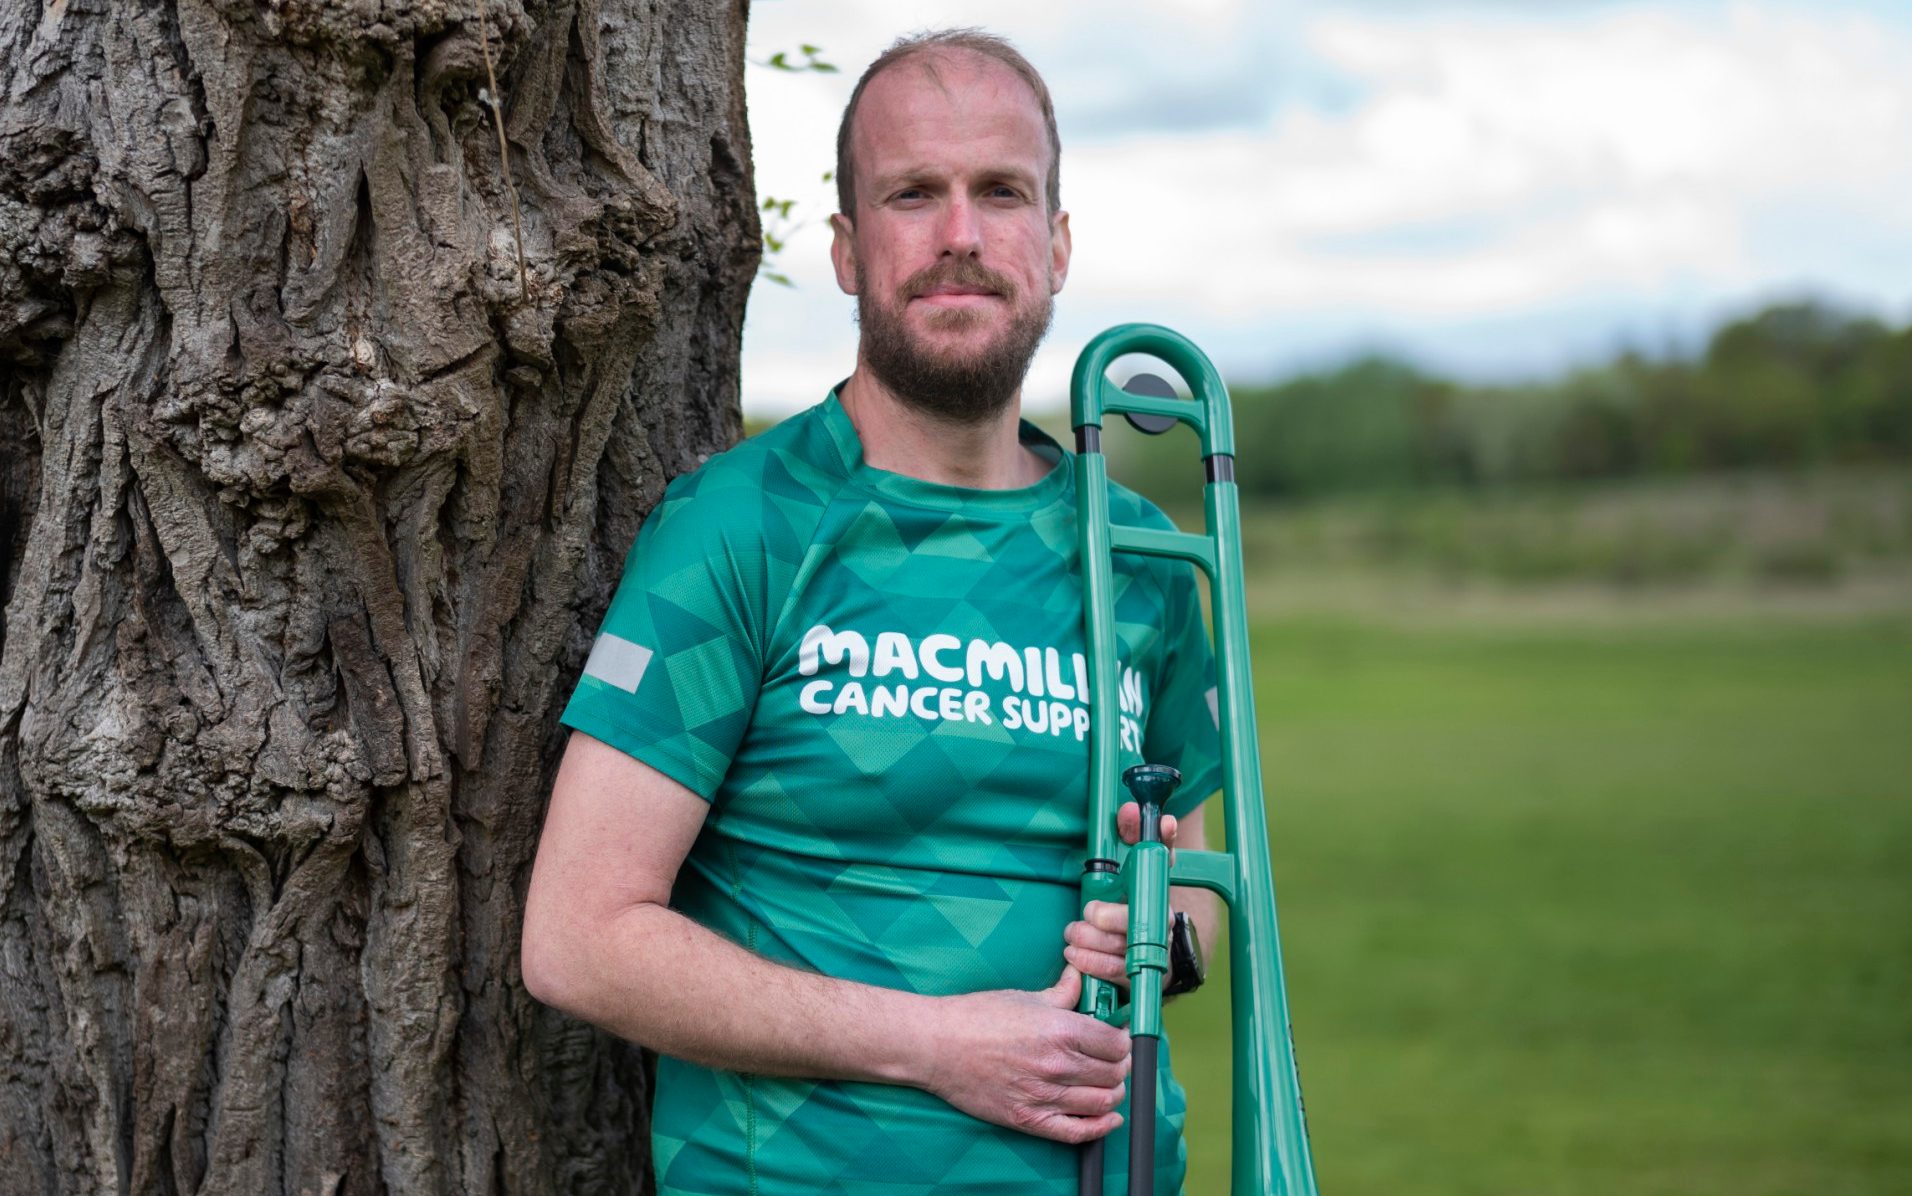 ‘i have terminal cancer, but i will run the london marathon playing a trombone’